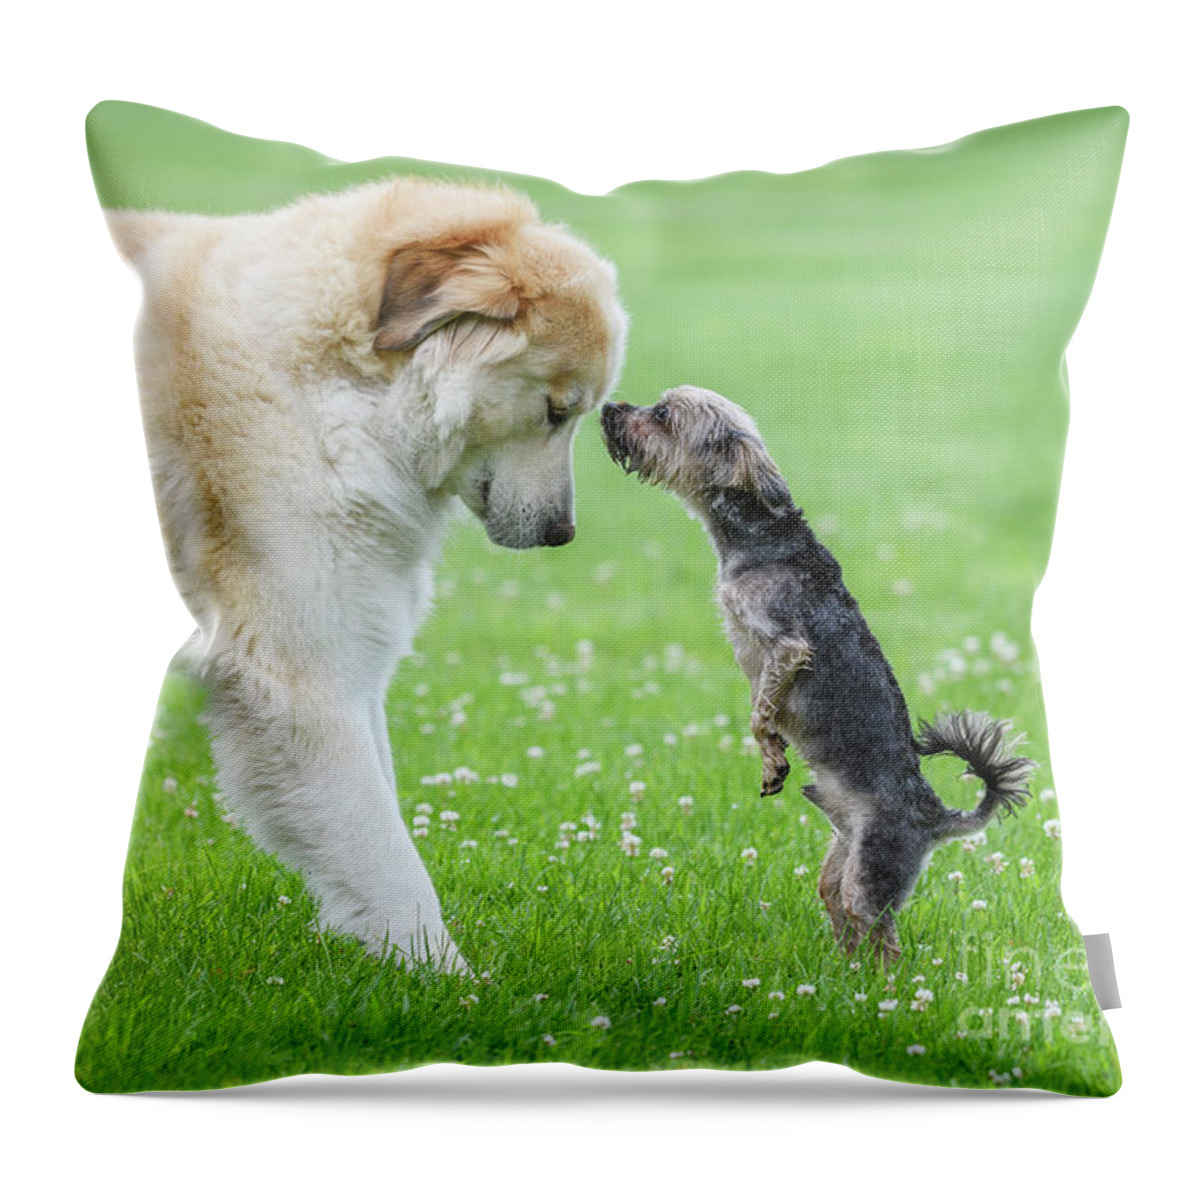 Canine Throw Pillow featuring the photograph Bigness by Nina Stavlund